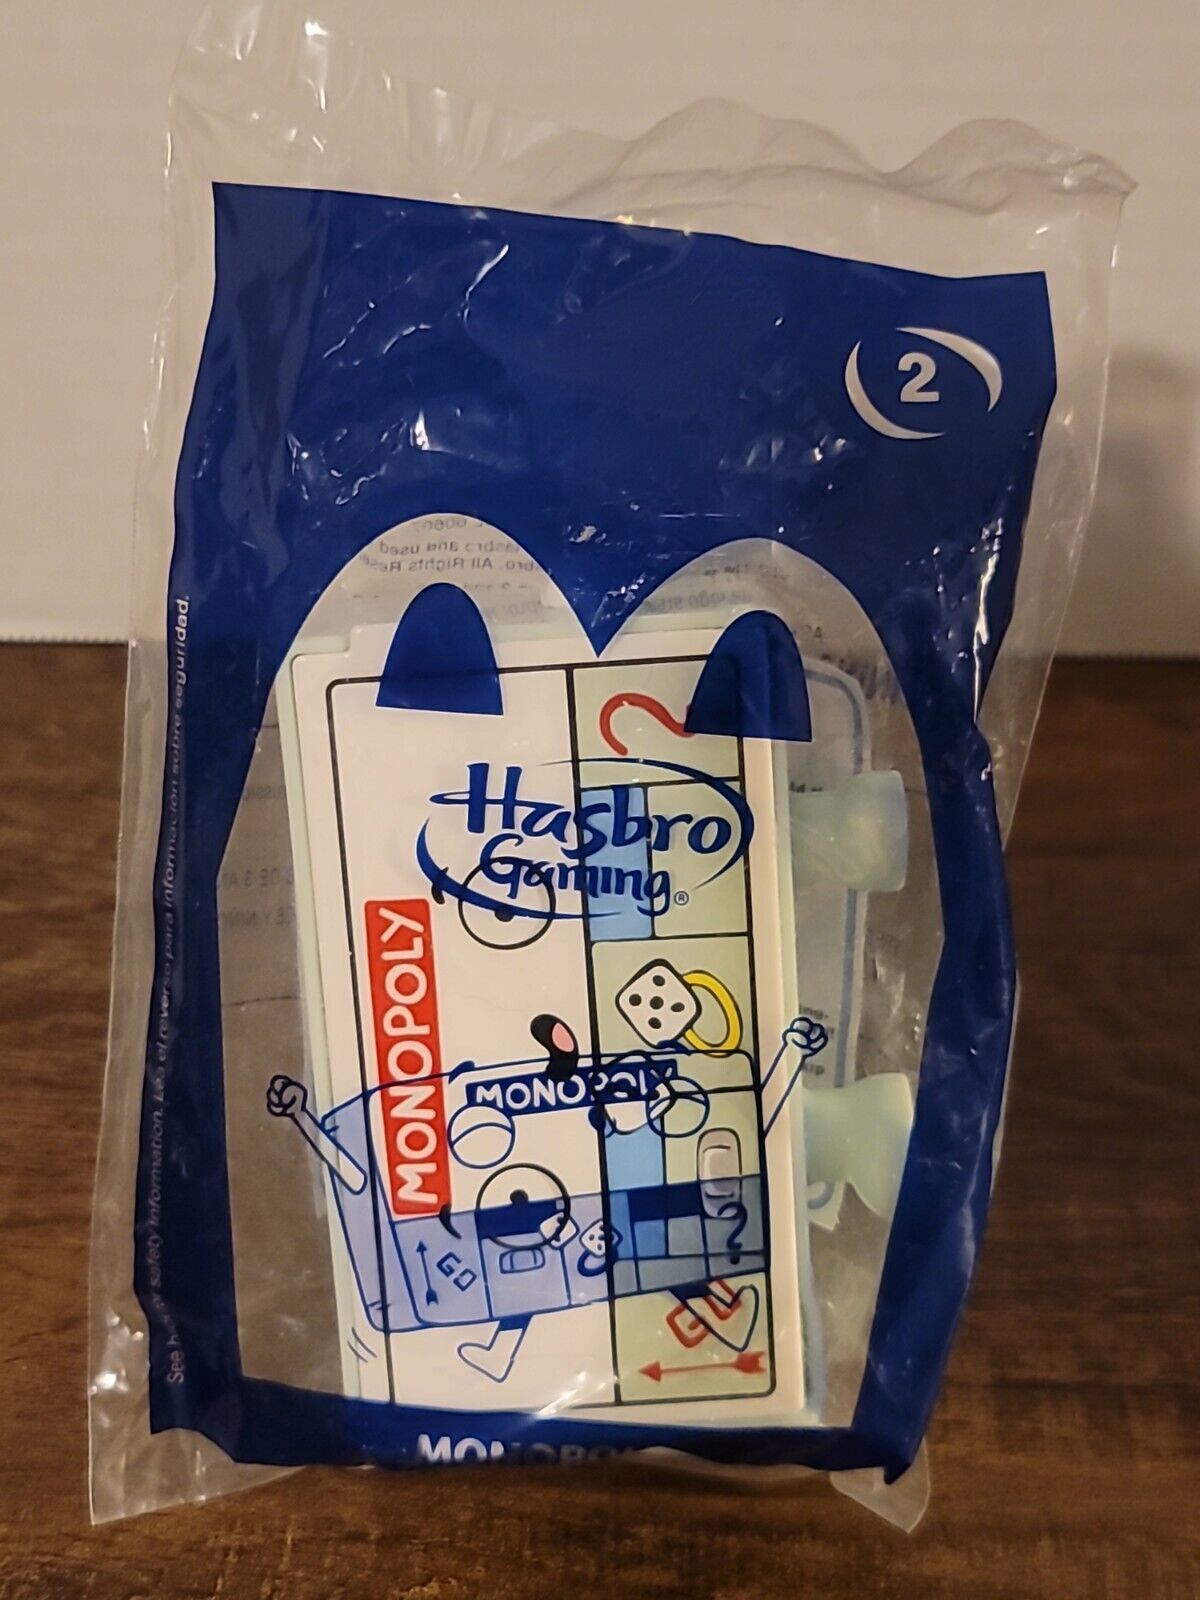 2020 HASBRO GAMING MONOPOLY GAME McDONALDS HAPPY MEAL TOY #2 BRAND NEW SEALED - $8.99